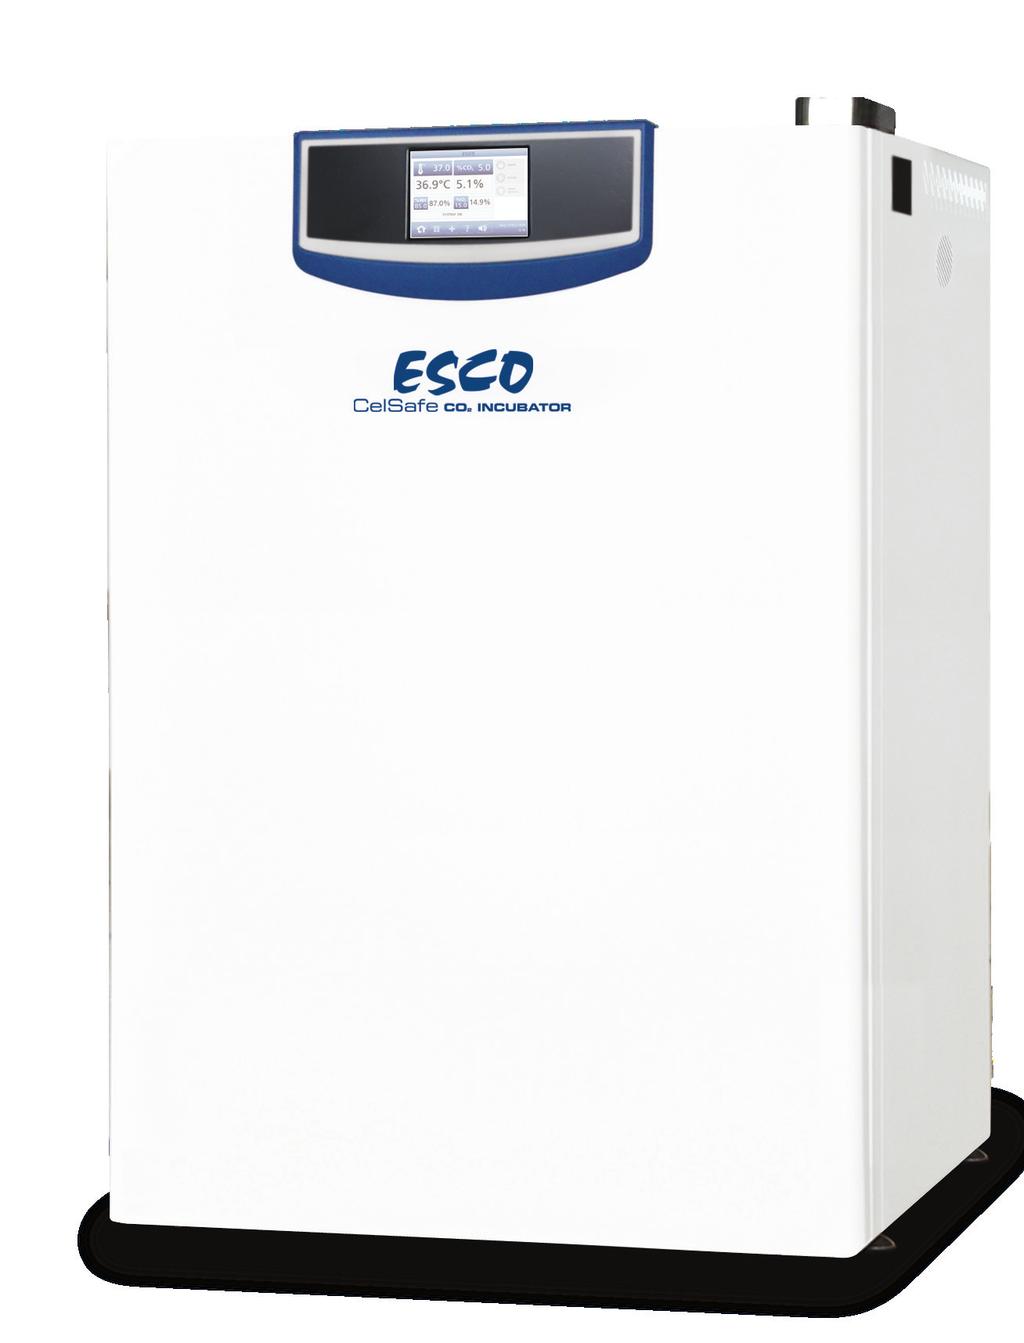 CelSafe 3 CelSafe : NEW GENERATION CO INCUBATOR Esco s CelSafe CO incubator with touch screen user interface and latest advanced technology represents safety of your precious samples, efficiency on